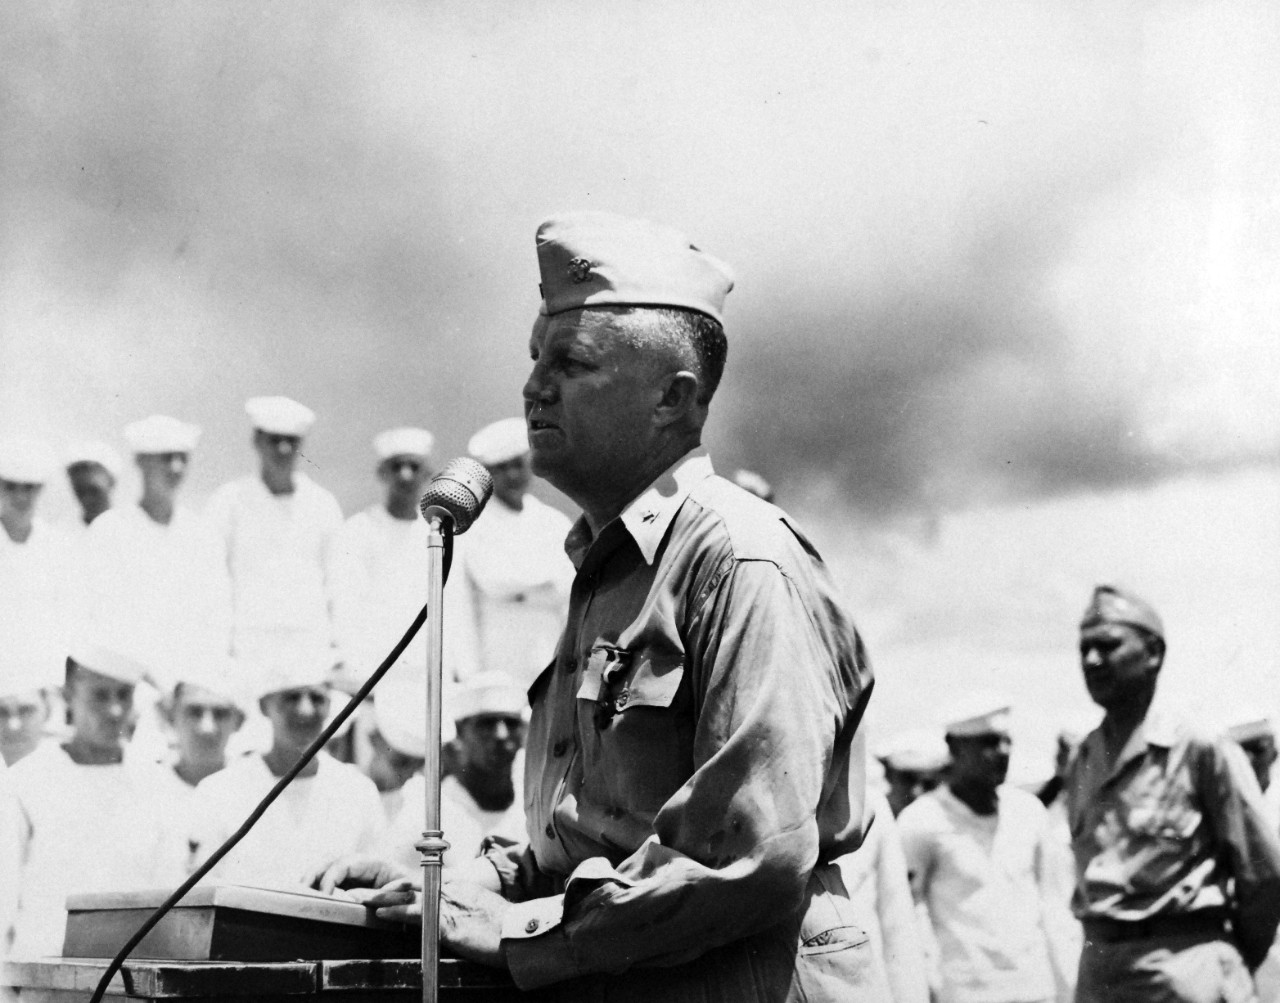 <p>80-G-216848: USS Columbia (CL-56), February 1944. Battle of Empress Augusta Bay, November 1-2, 1943. Speech at the presentation of awards to officers and crew. Shown: Captain Frank E. Beatty, USN, giving thanks after receiving the Navy Cross, February 1, 1944.&nbsp;</p>
